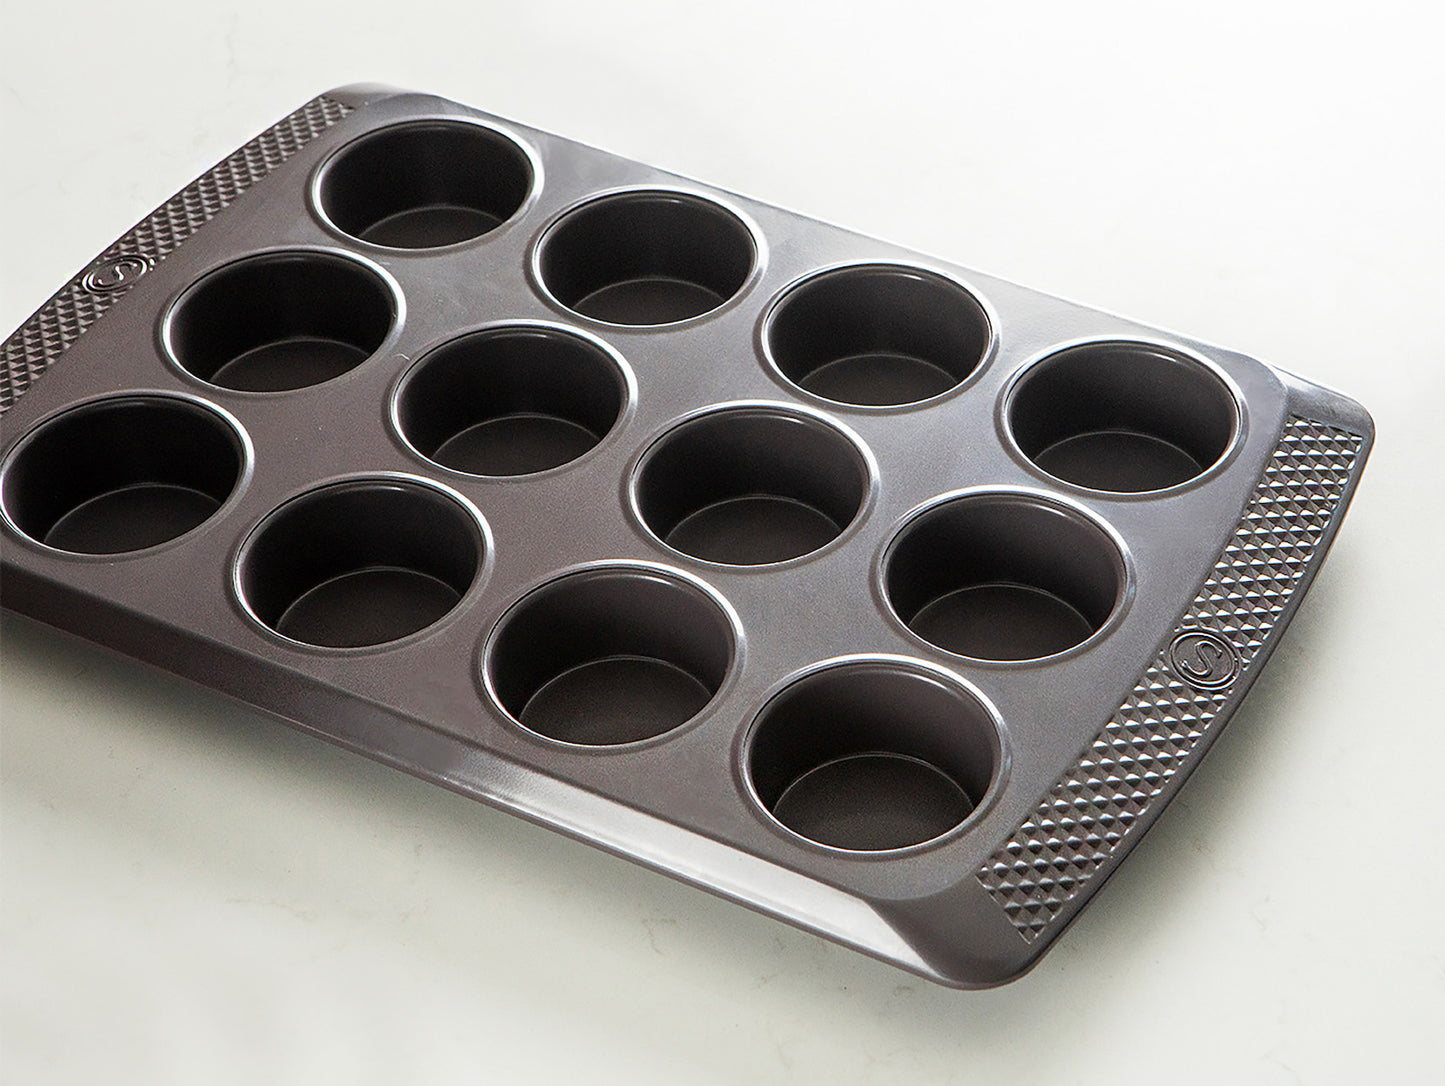 Muffin Pan Media 12 Well